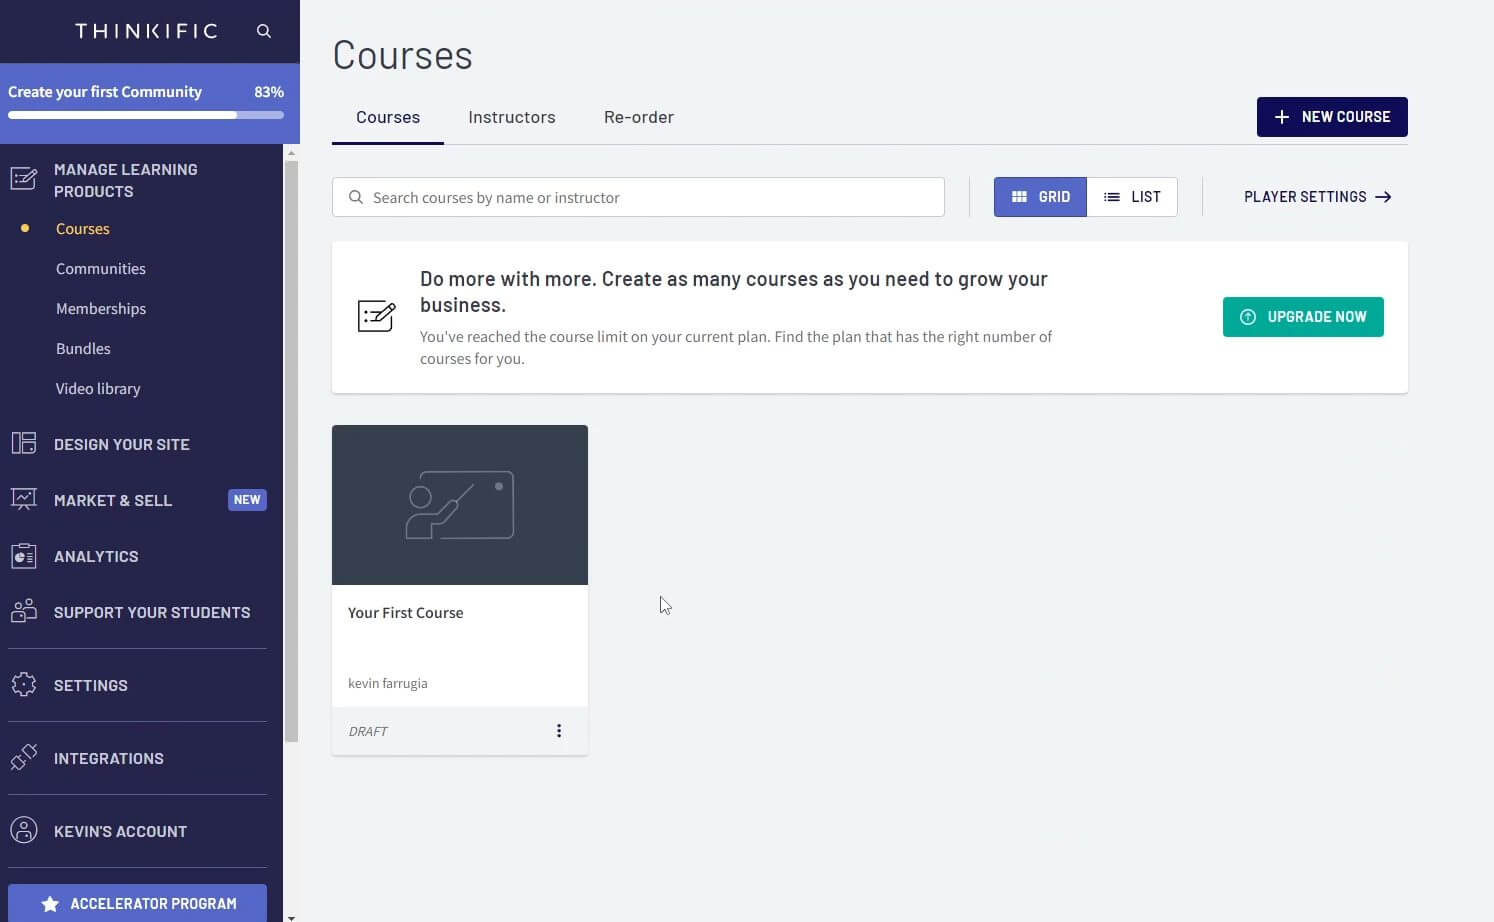 Thinkific courses